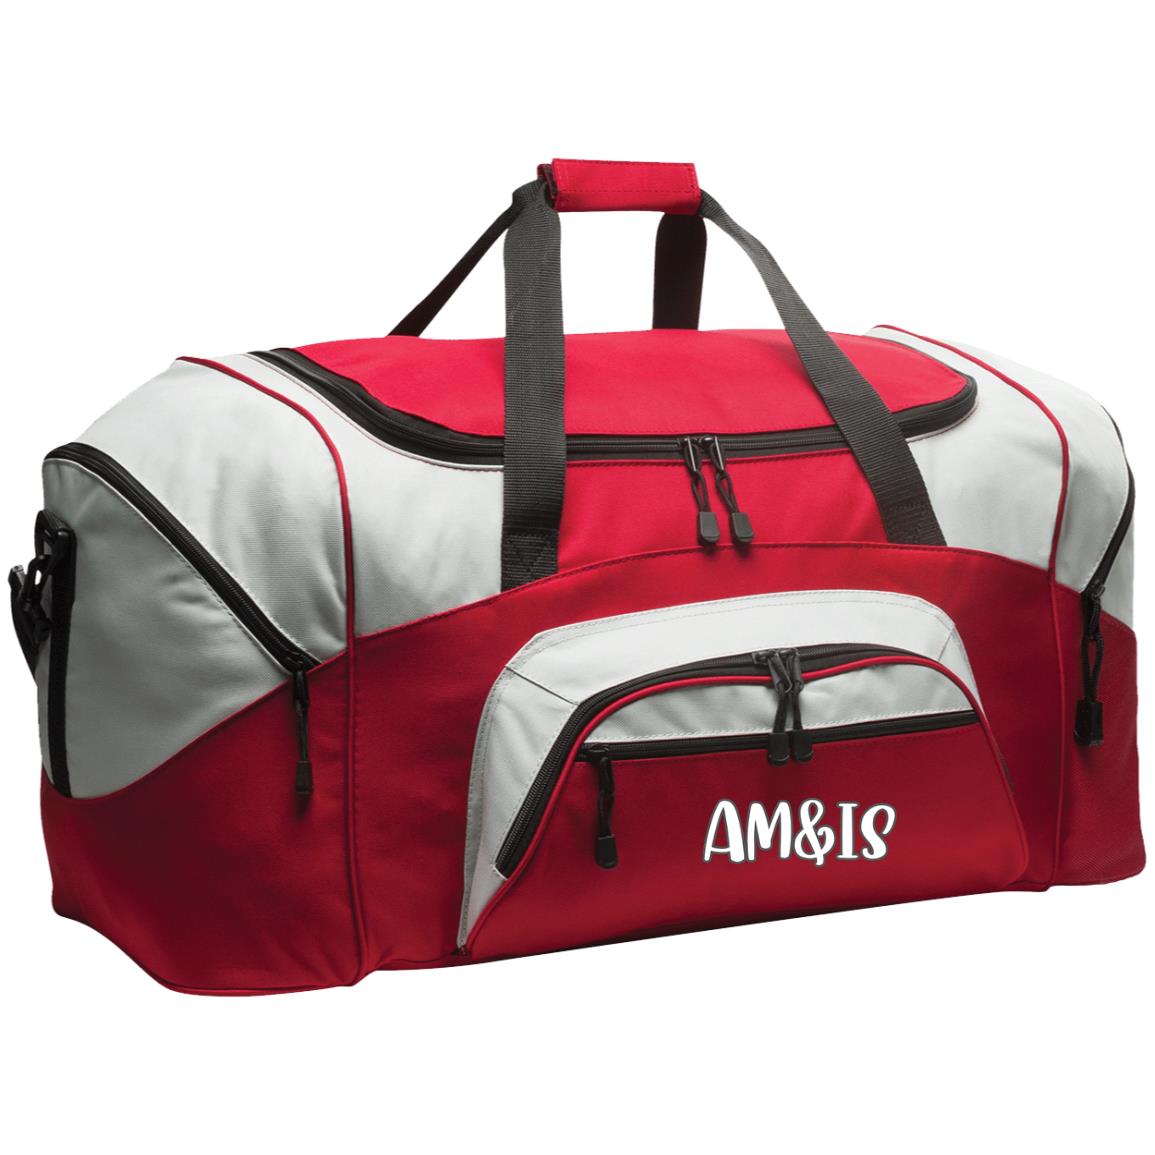 RED GRAY ONE SIZE - AM&IS Activewear Colorblock Sport Duffel - duffel bag at TFC&H Co.